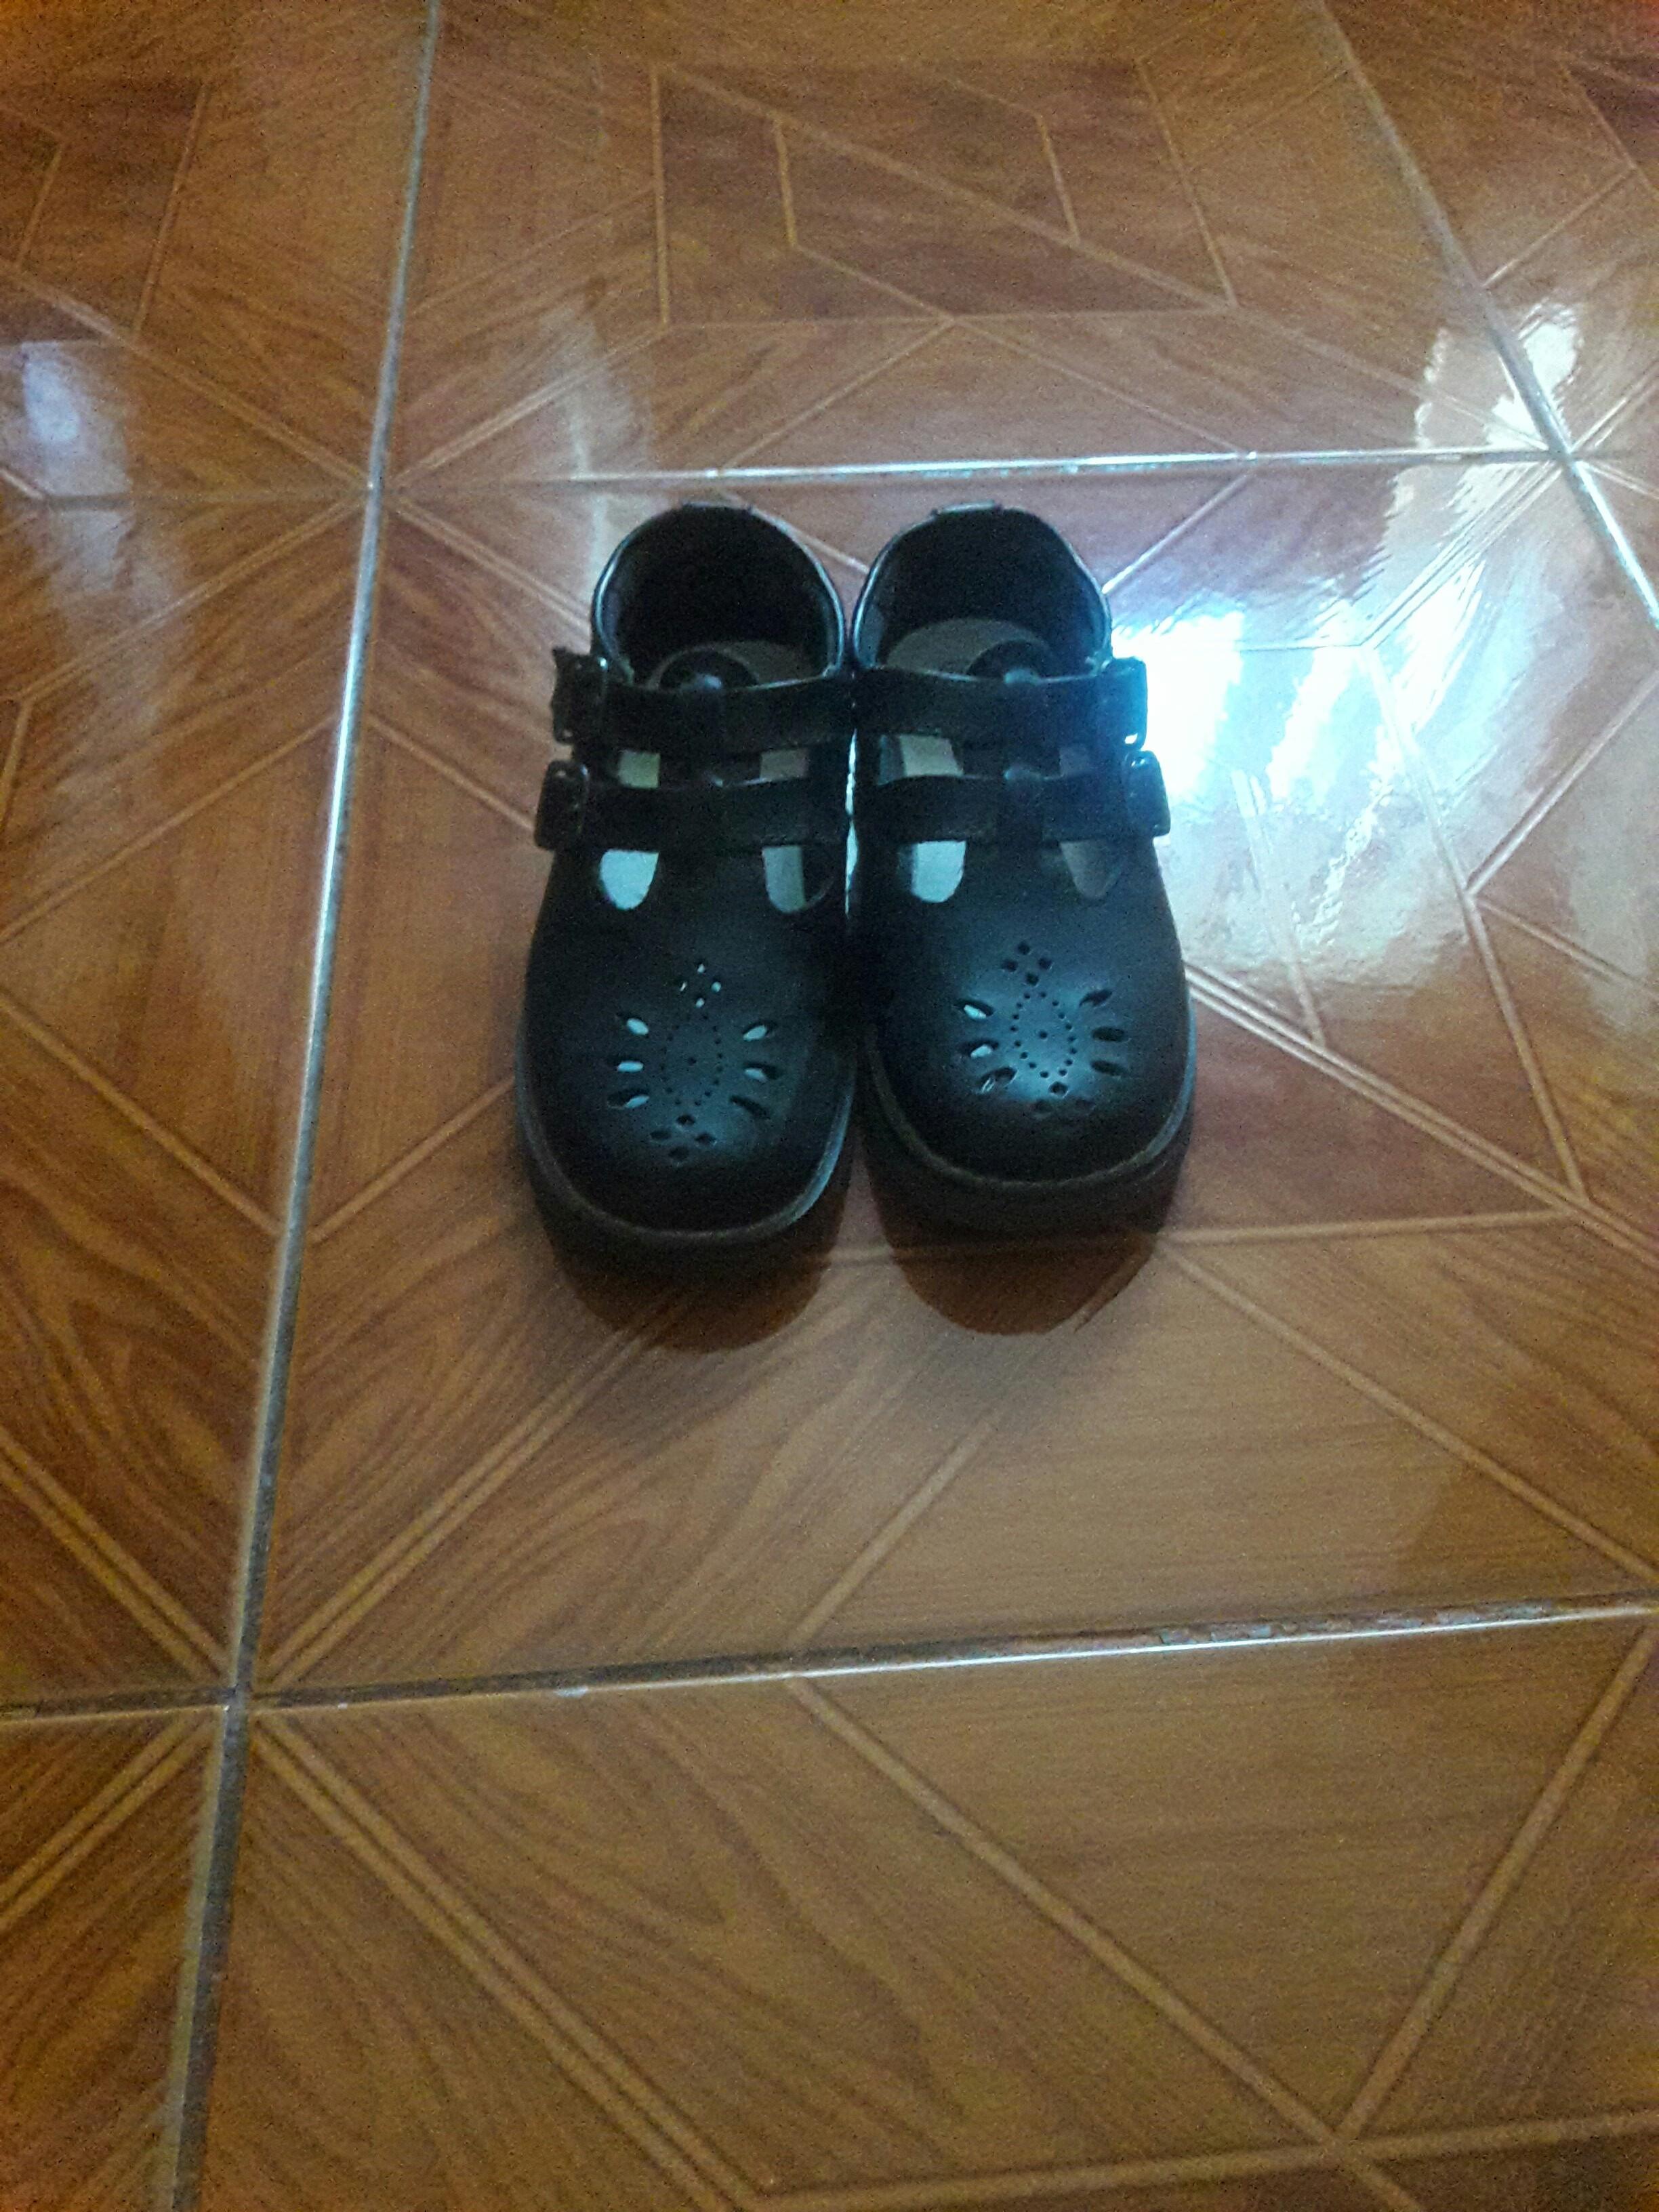 Payless School Shoes for Sale, Babies 